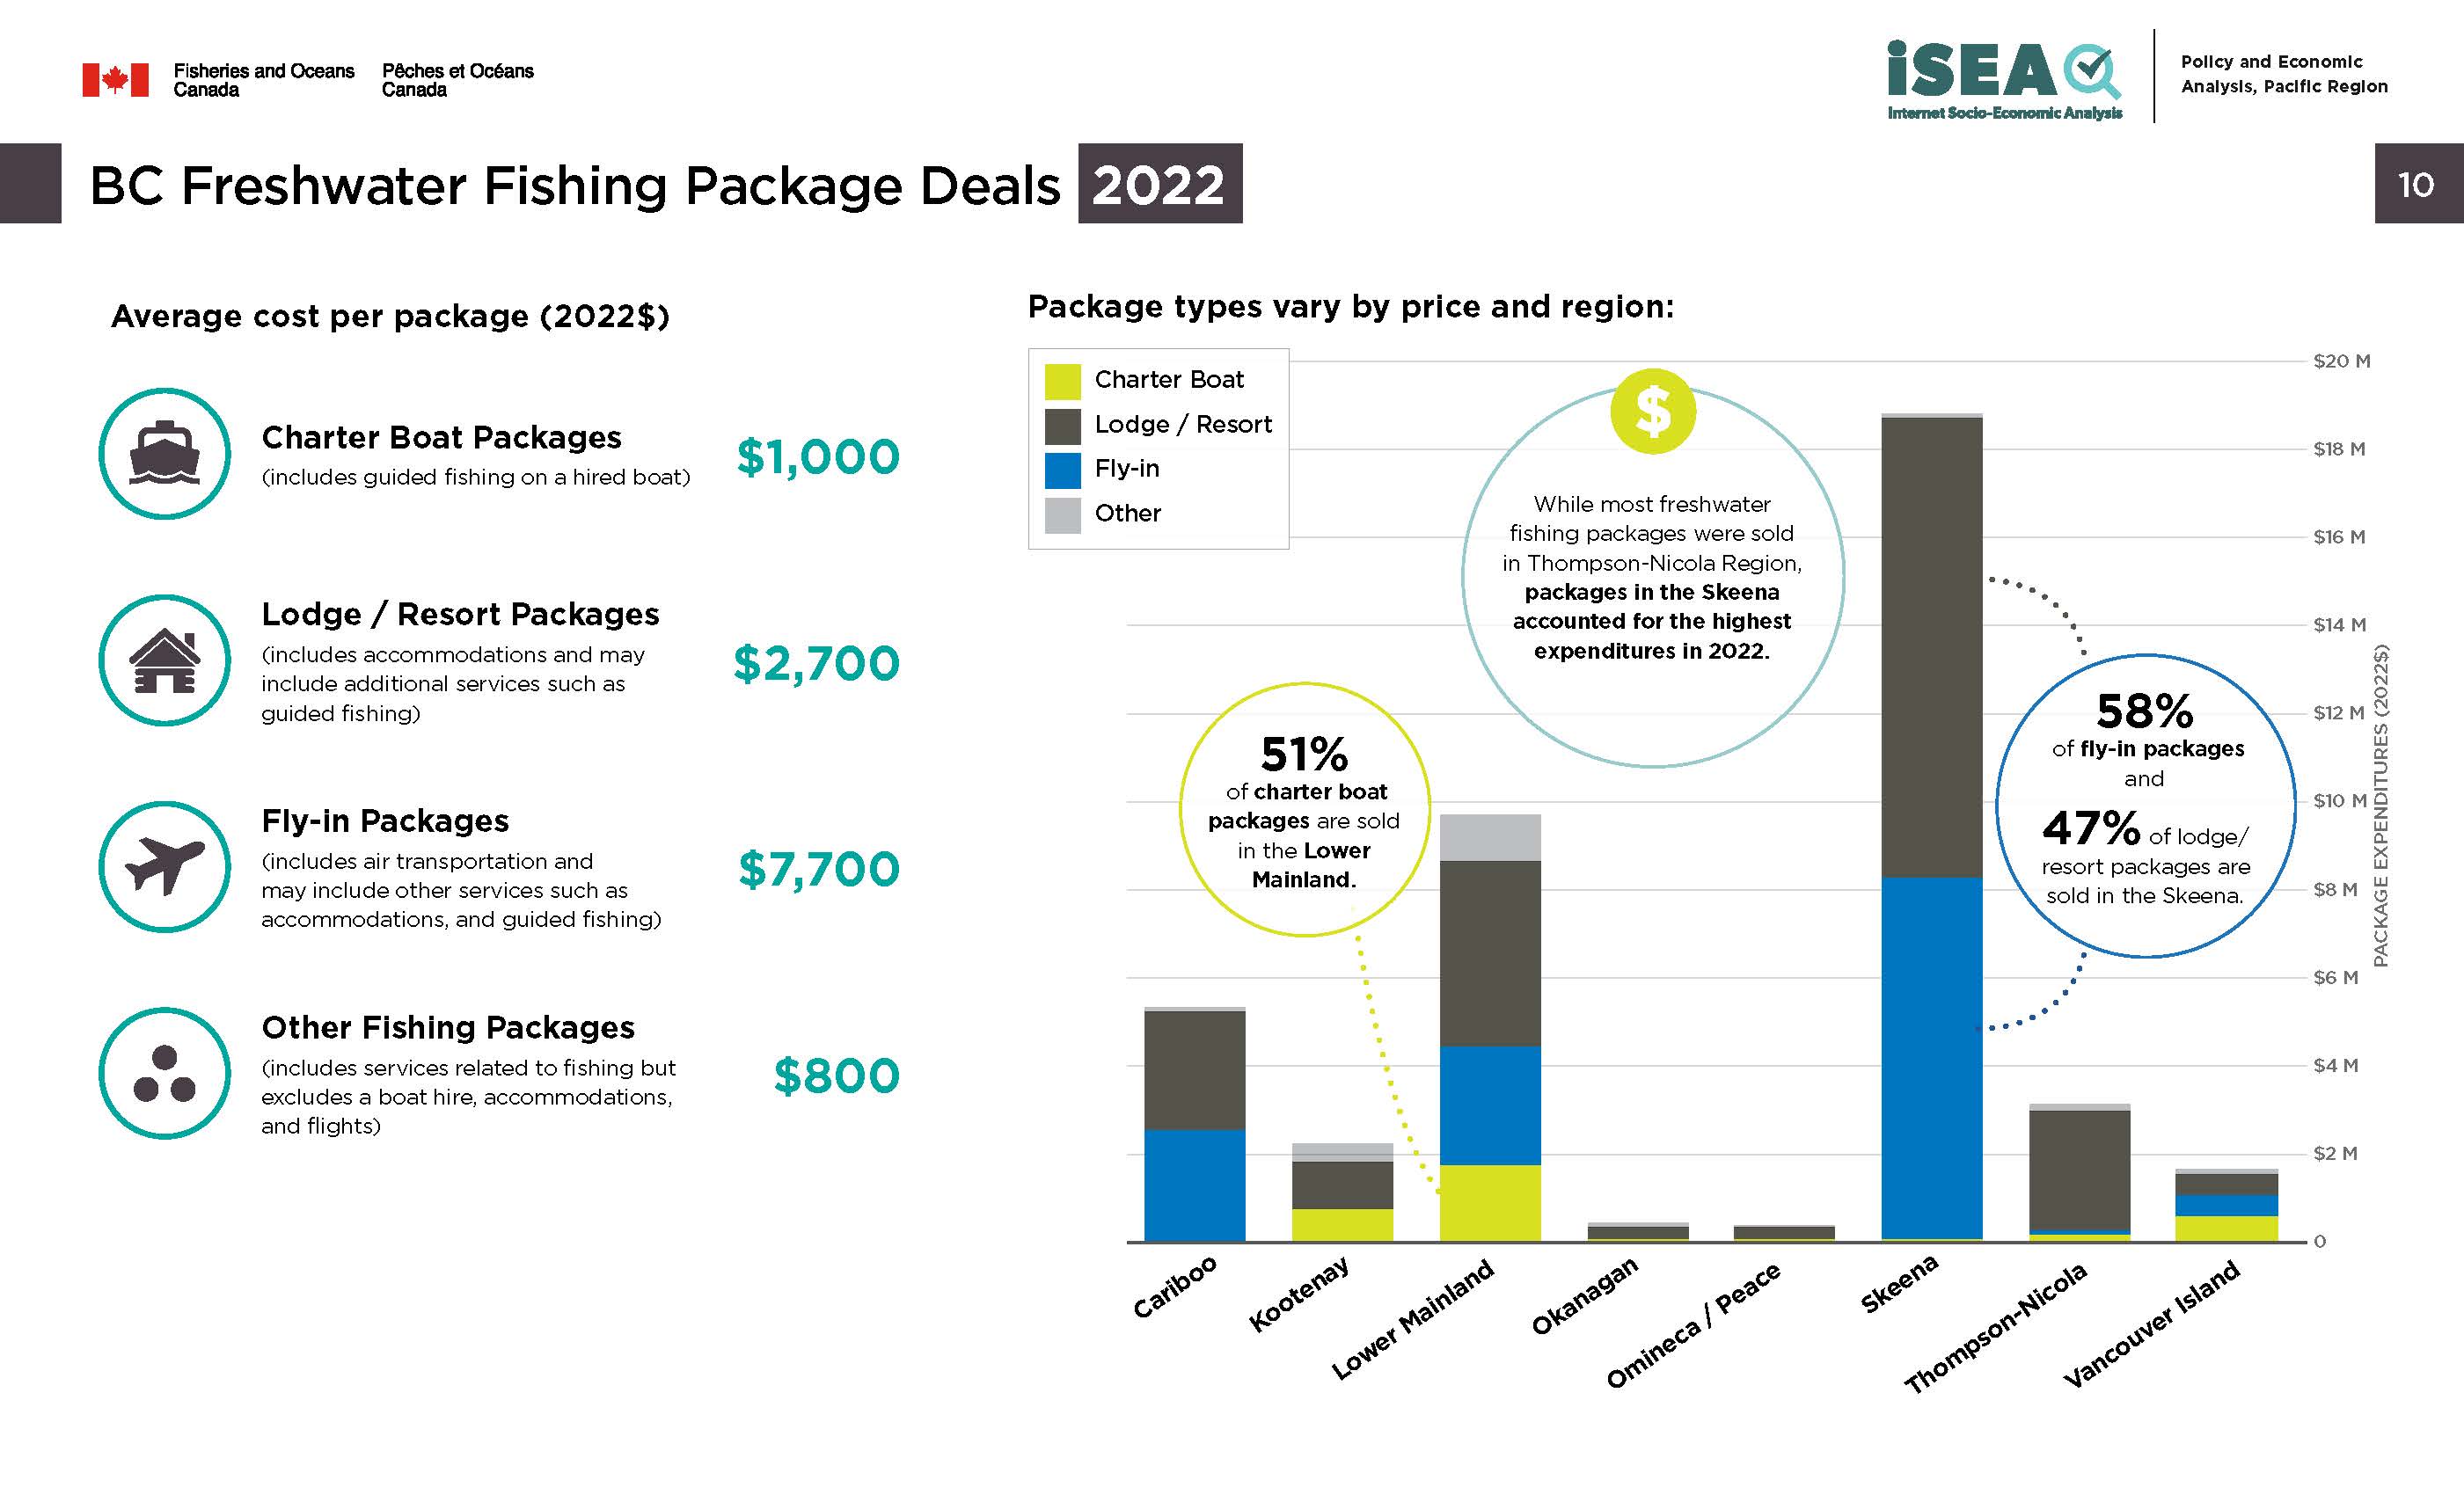 Photo: infographic of BC freshwater fishing package deals, 2022